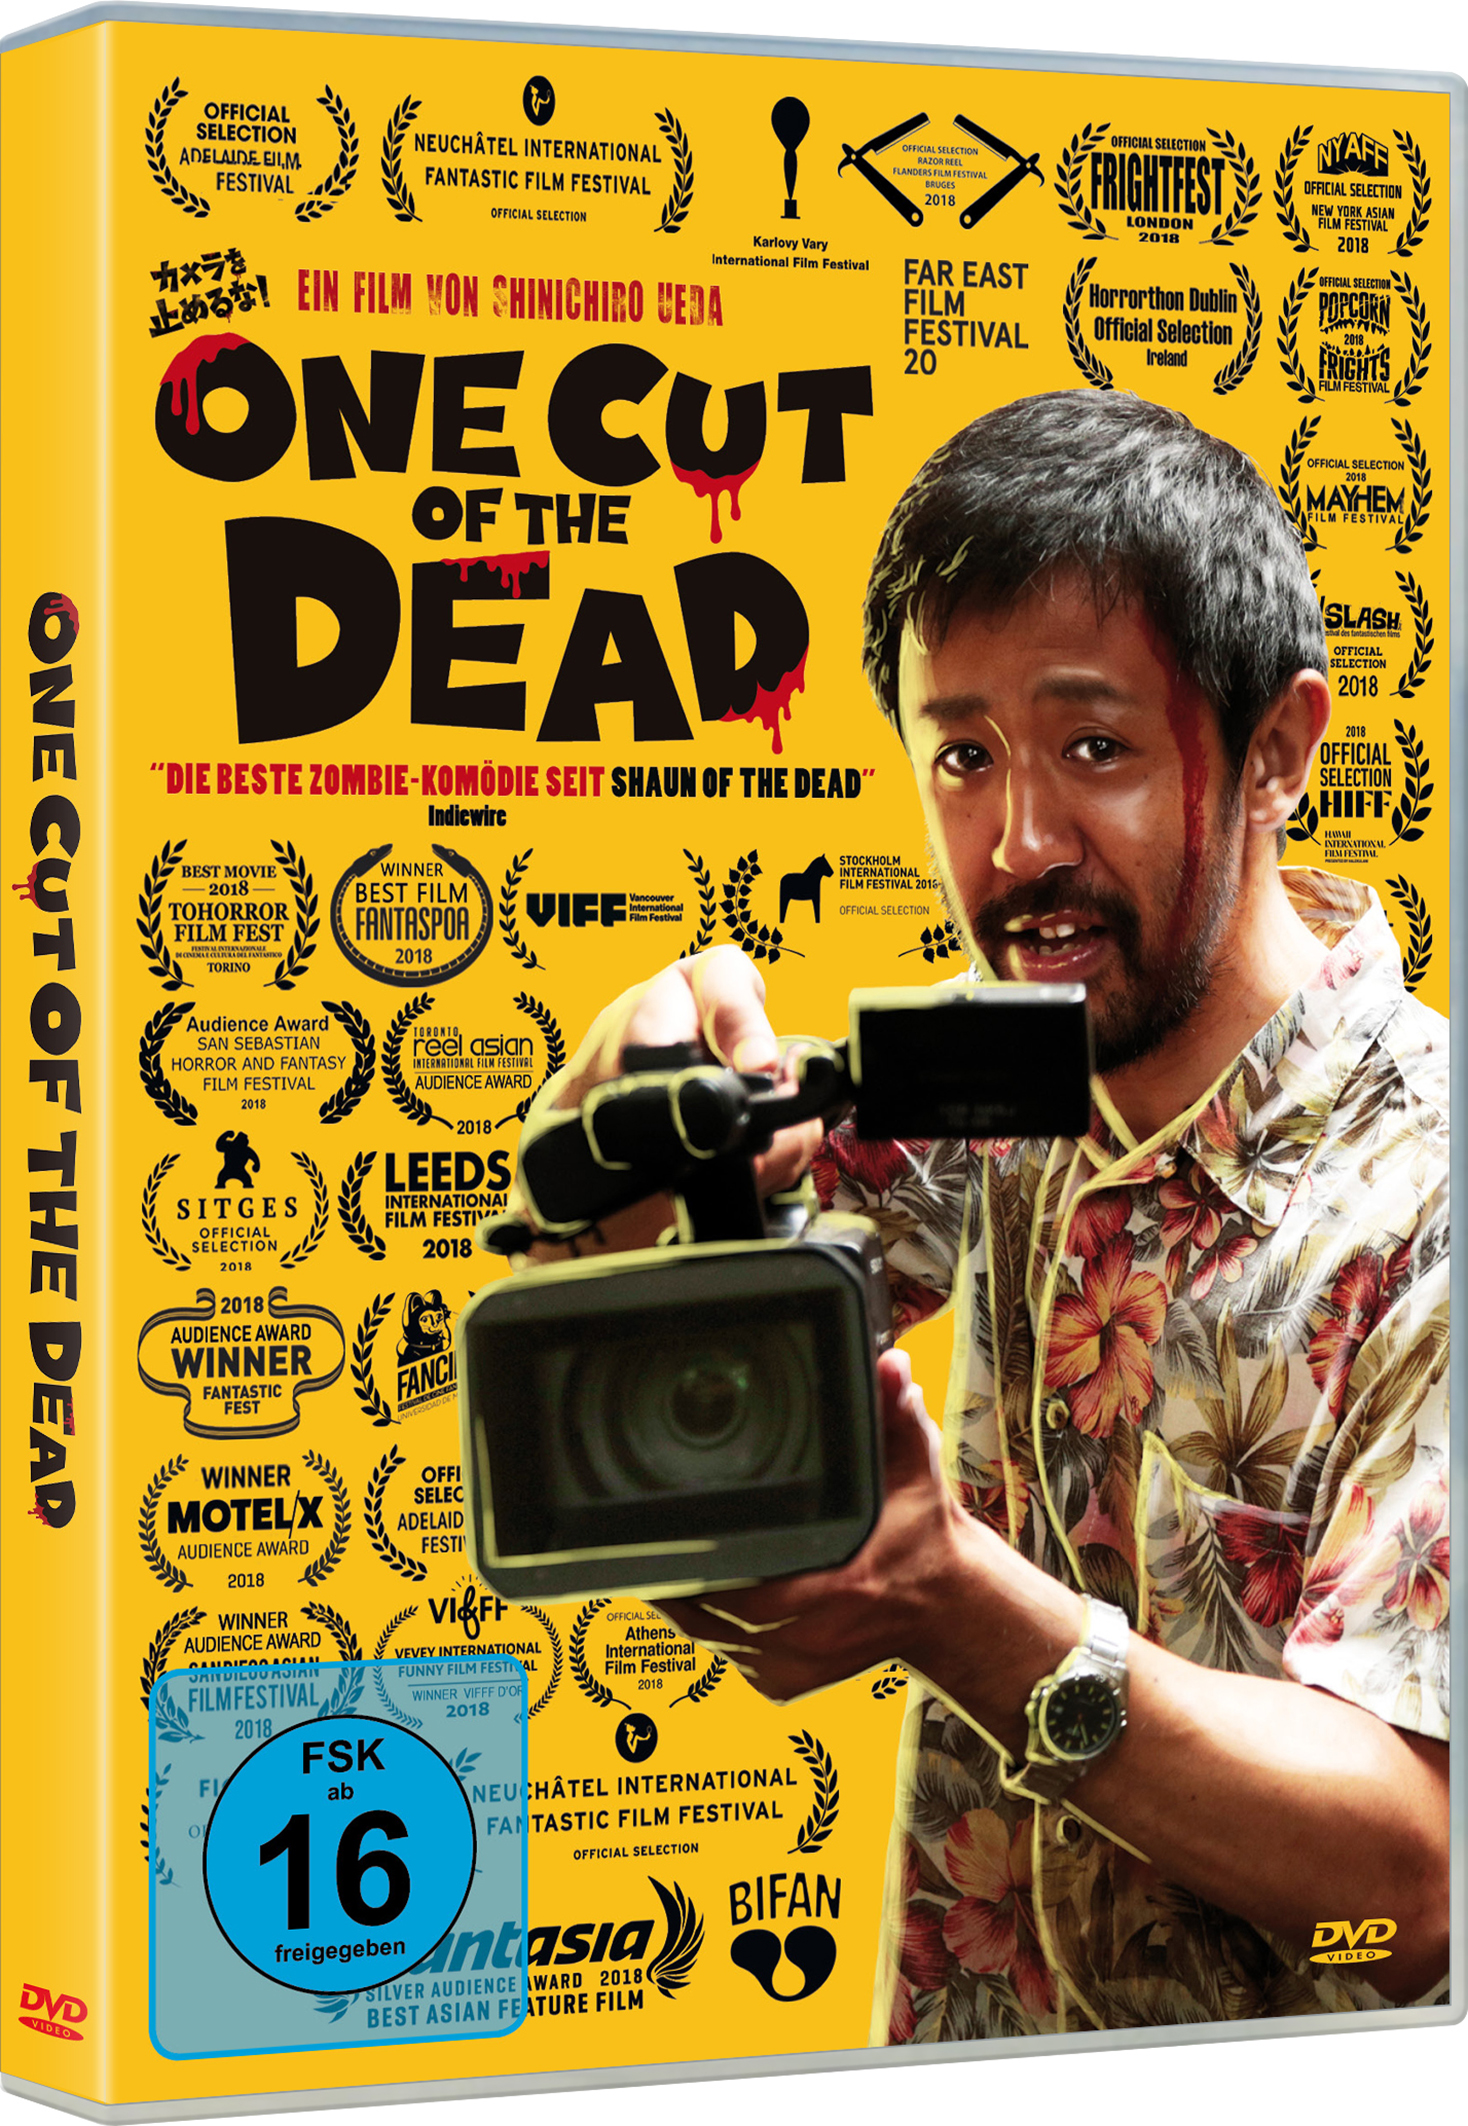 One Cut of the Dead (DVD) Image 2